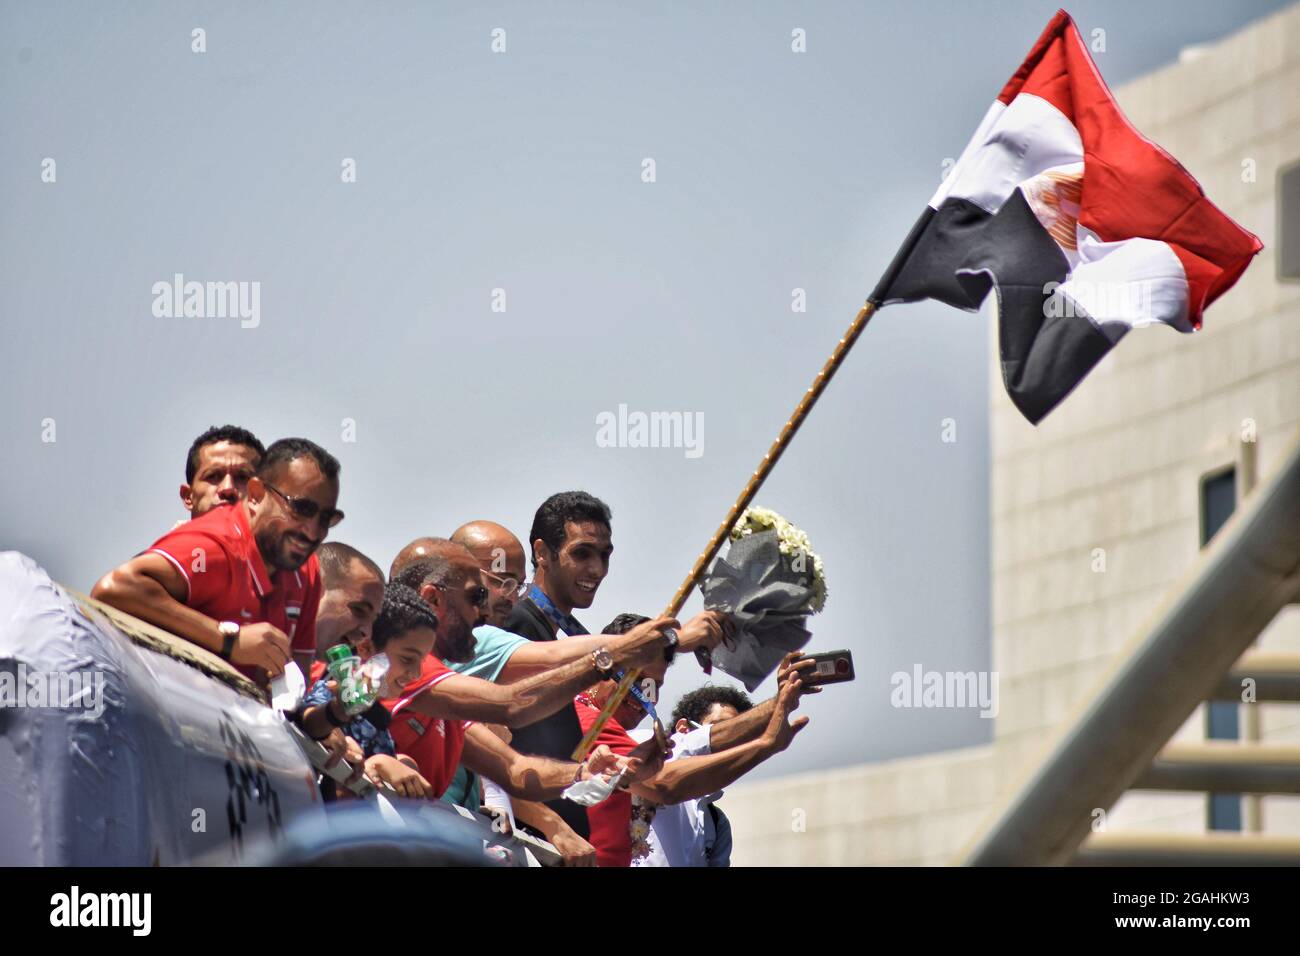 Cairo Governorate, Egypt. 28th July, 2021. Cairo, Egypt. 28 July 2021. Egyptian athletes Hedaya Malak and Saif Issa receive a warm welcome as they arrive at Cairo Airport after winning the bronze medal at the 2020 Tokyo Olympics. Hedaya Malak and Seif Issa are players of taekwondo who won the bronze medal in the 67 and 80 Kg weight category respectively at the Olympic Games in Tokyo. Hedaya Malak won the medal in the women's singles competitions after defeating the American Peggy McPherson 17/6, while Saif Issa won the medal in the men's singles competitions after defeating Norway's Stock Photo